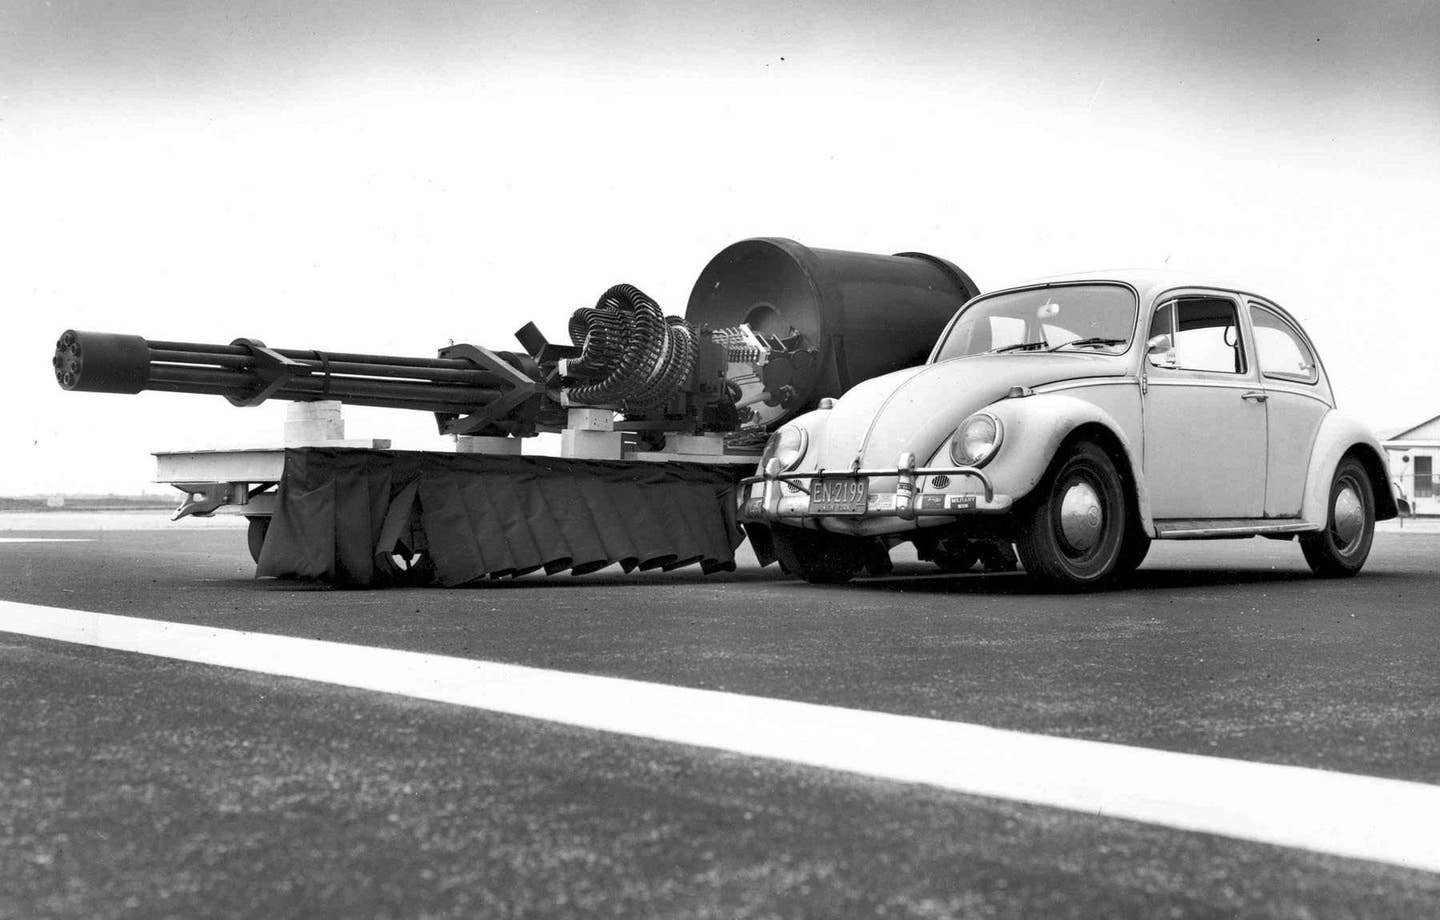 The GAU-8/A Avenger Gatling gun next to a VW Type 1. Removing an installed GAU-8 from an A-10 requires first installing a jack under the aircraft's tail to prevent it from tipping, as the cannon makes up most of the aircraft's forward weight. (US Air Force photo)